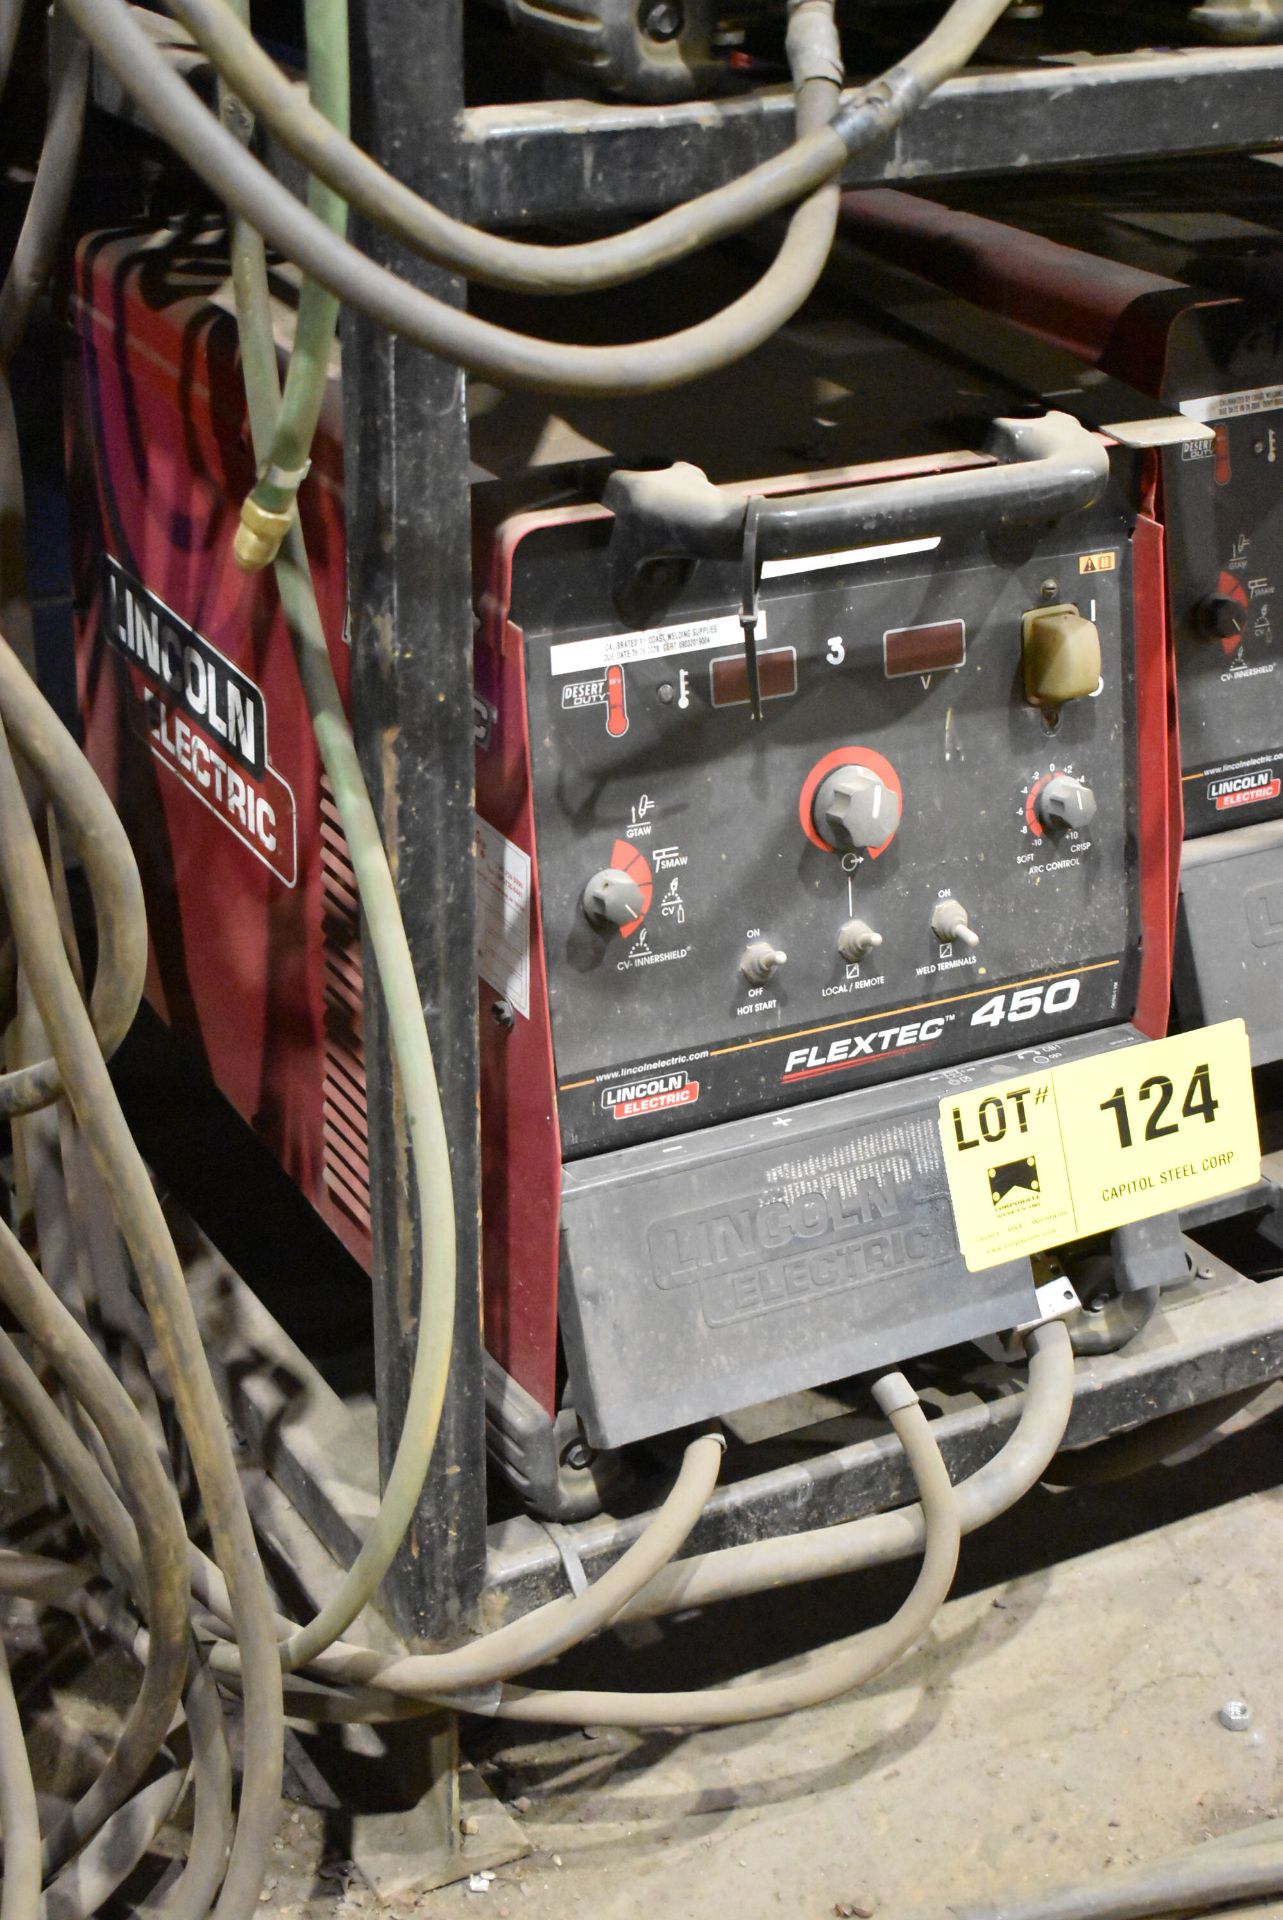 LINCOLN ELECTRIC FLEXTEC 450 MULTI-PROCESS INVERTER WELDING POWER SOURCE (NO CABLES), S/N: N/A (